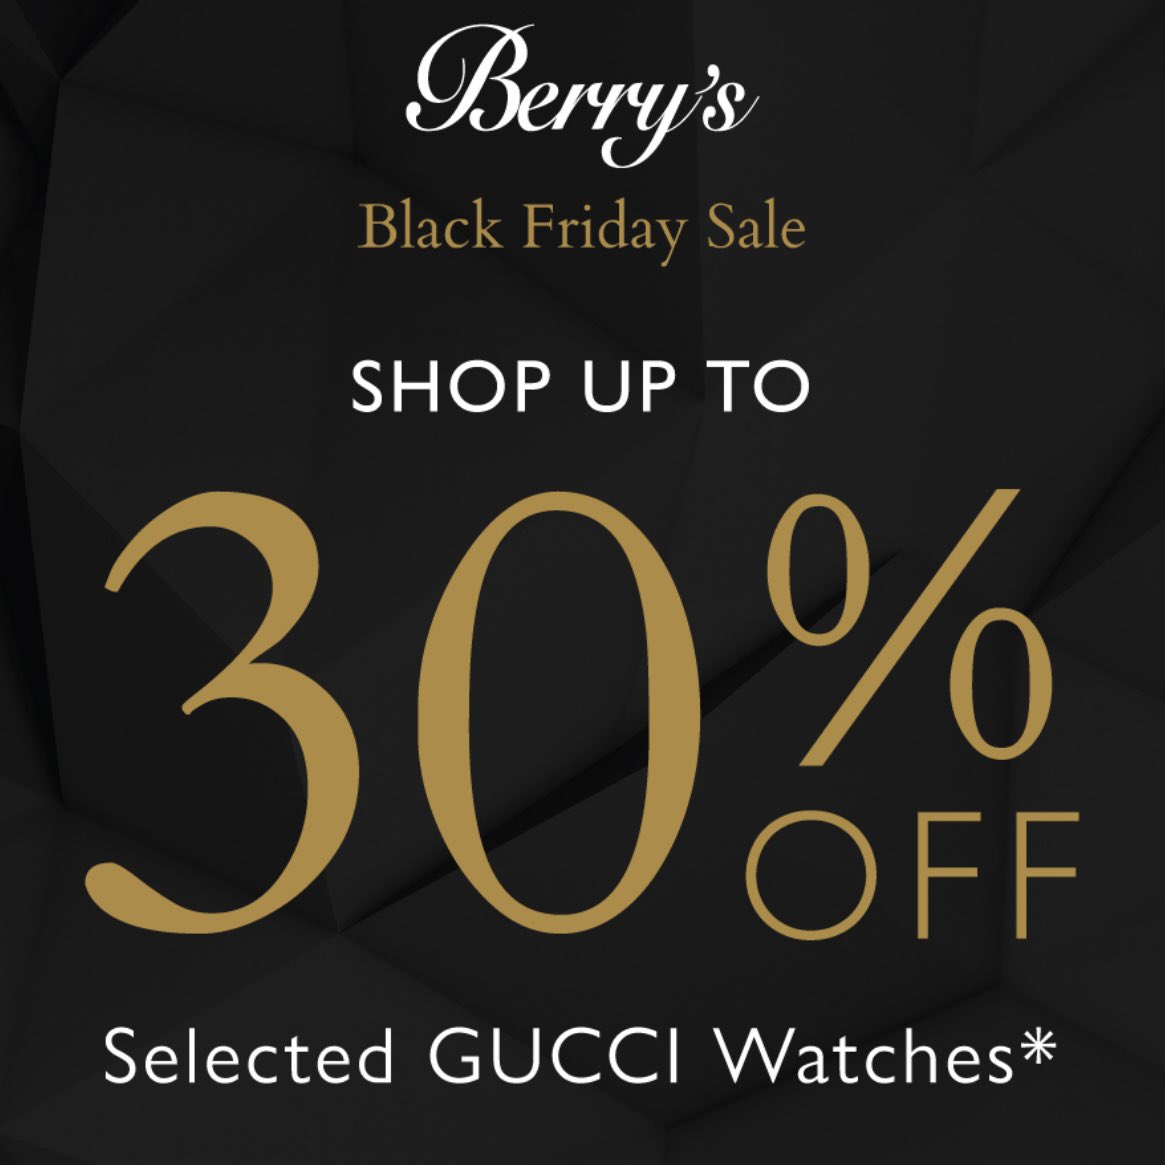 Our Black Friday Sale continues with 30% off selected Gucci watches ✨ Click the link below to discover more. bit.ly/47G3m1g #BerrysJewellers #BlackFridaySale